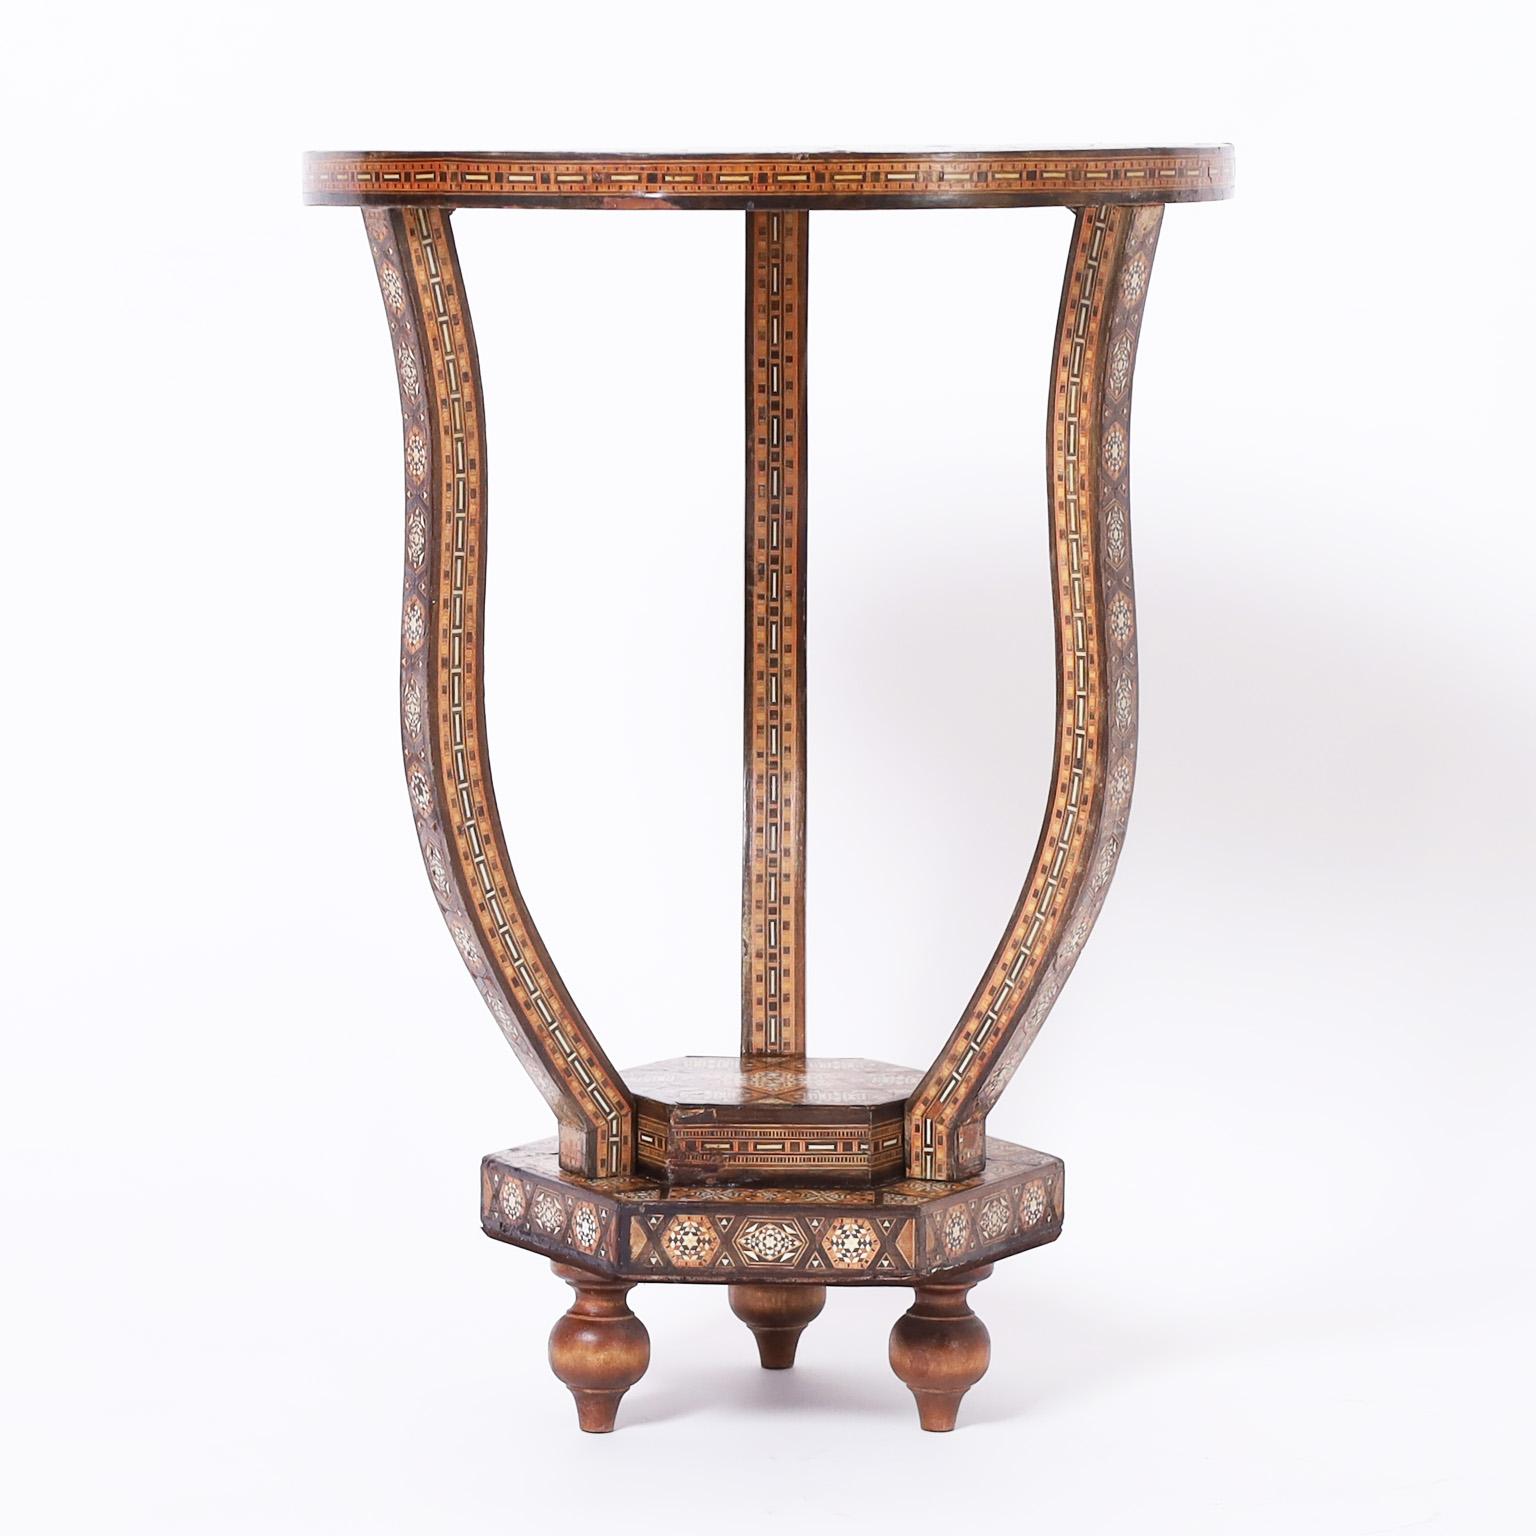 Impressive mid-century Moroccan stands having round tops decorated with inlaid marquetry crafted with mother of pearl and exotic hardwoods in star and geometric forms over three elegant inlaid legs on a double layered hexagon inlaid base with turned